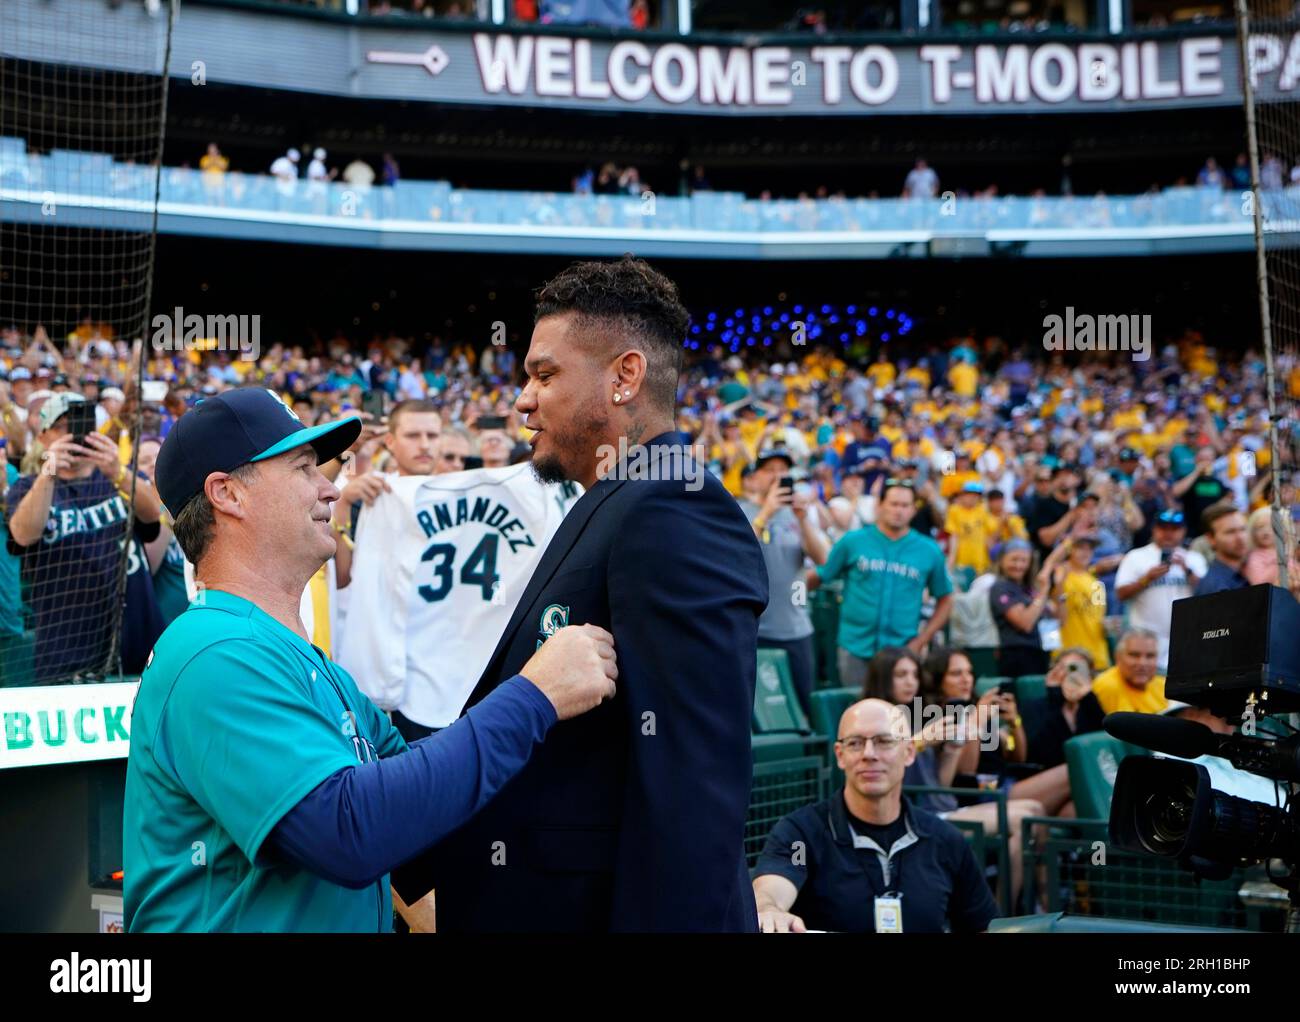 Felix Hernandez to be inducted into Mariners Hall of Fame 